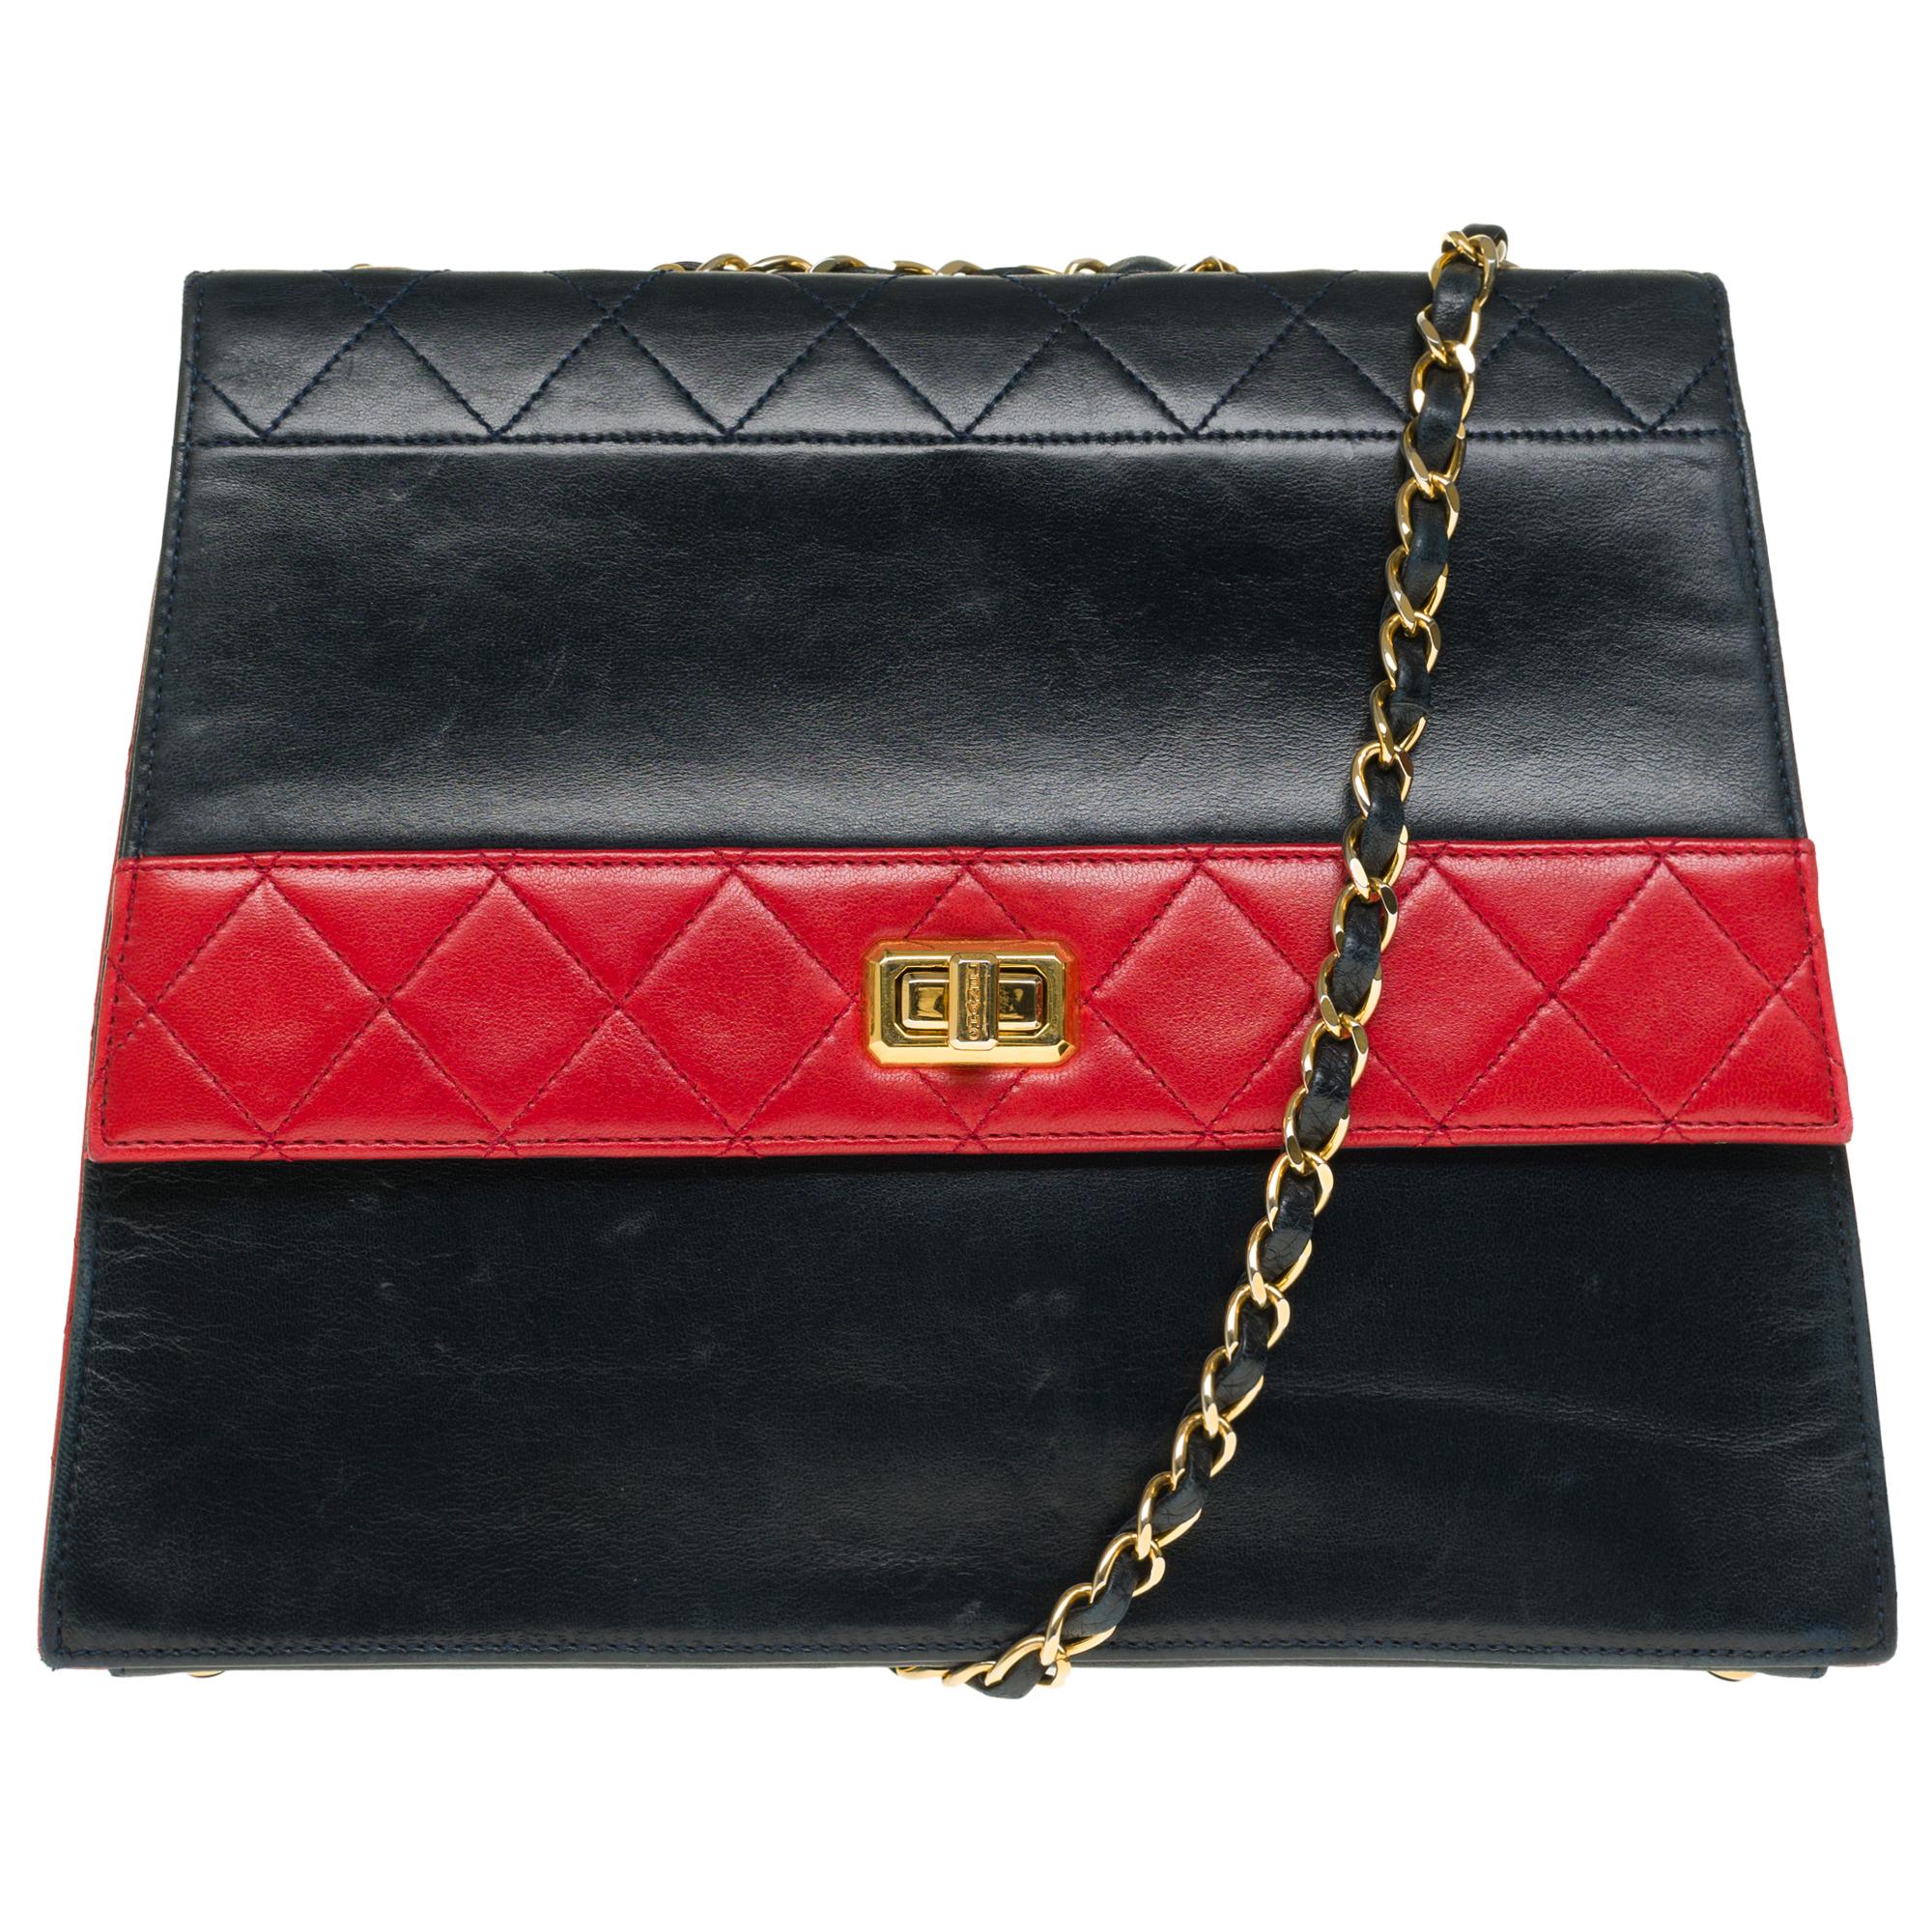 Gorgeous & Rare Chanel Trapezoidal shoulder flap bag in partially quilted navy blue and red leather, gold-tone metal hardware, a gold-tone metal chain handle interwoven with navy leather for a shoulder and crossbody carry

A patch pocket on the back